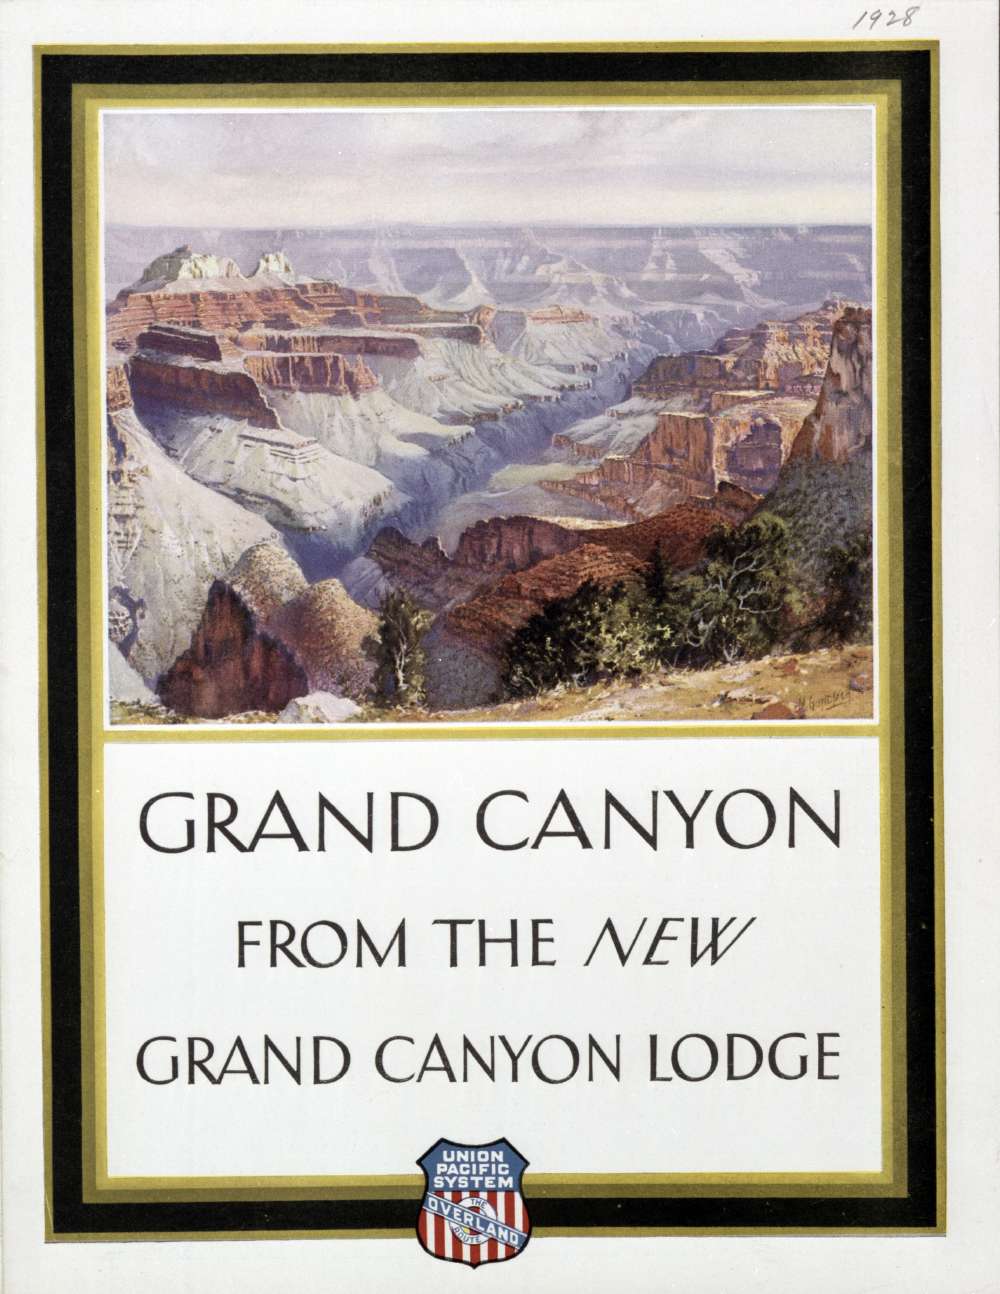 1928 Overland Route Brochure